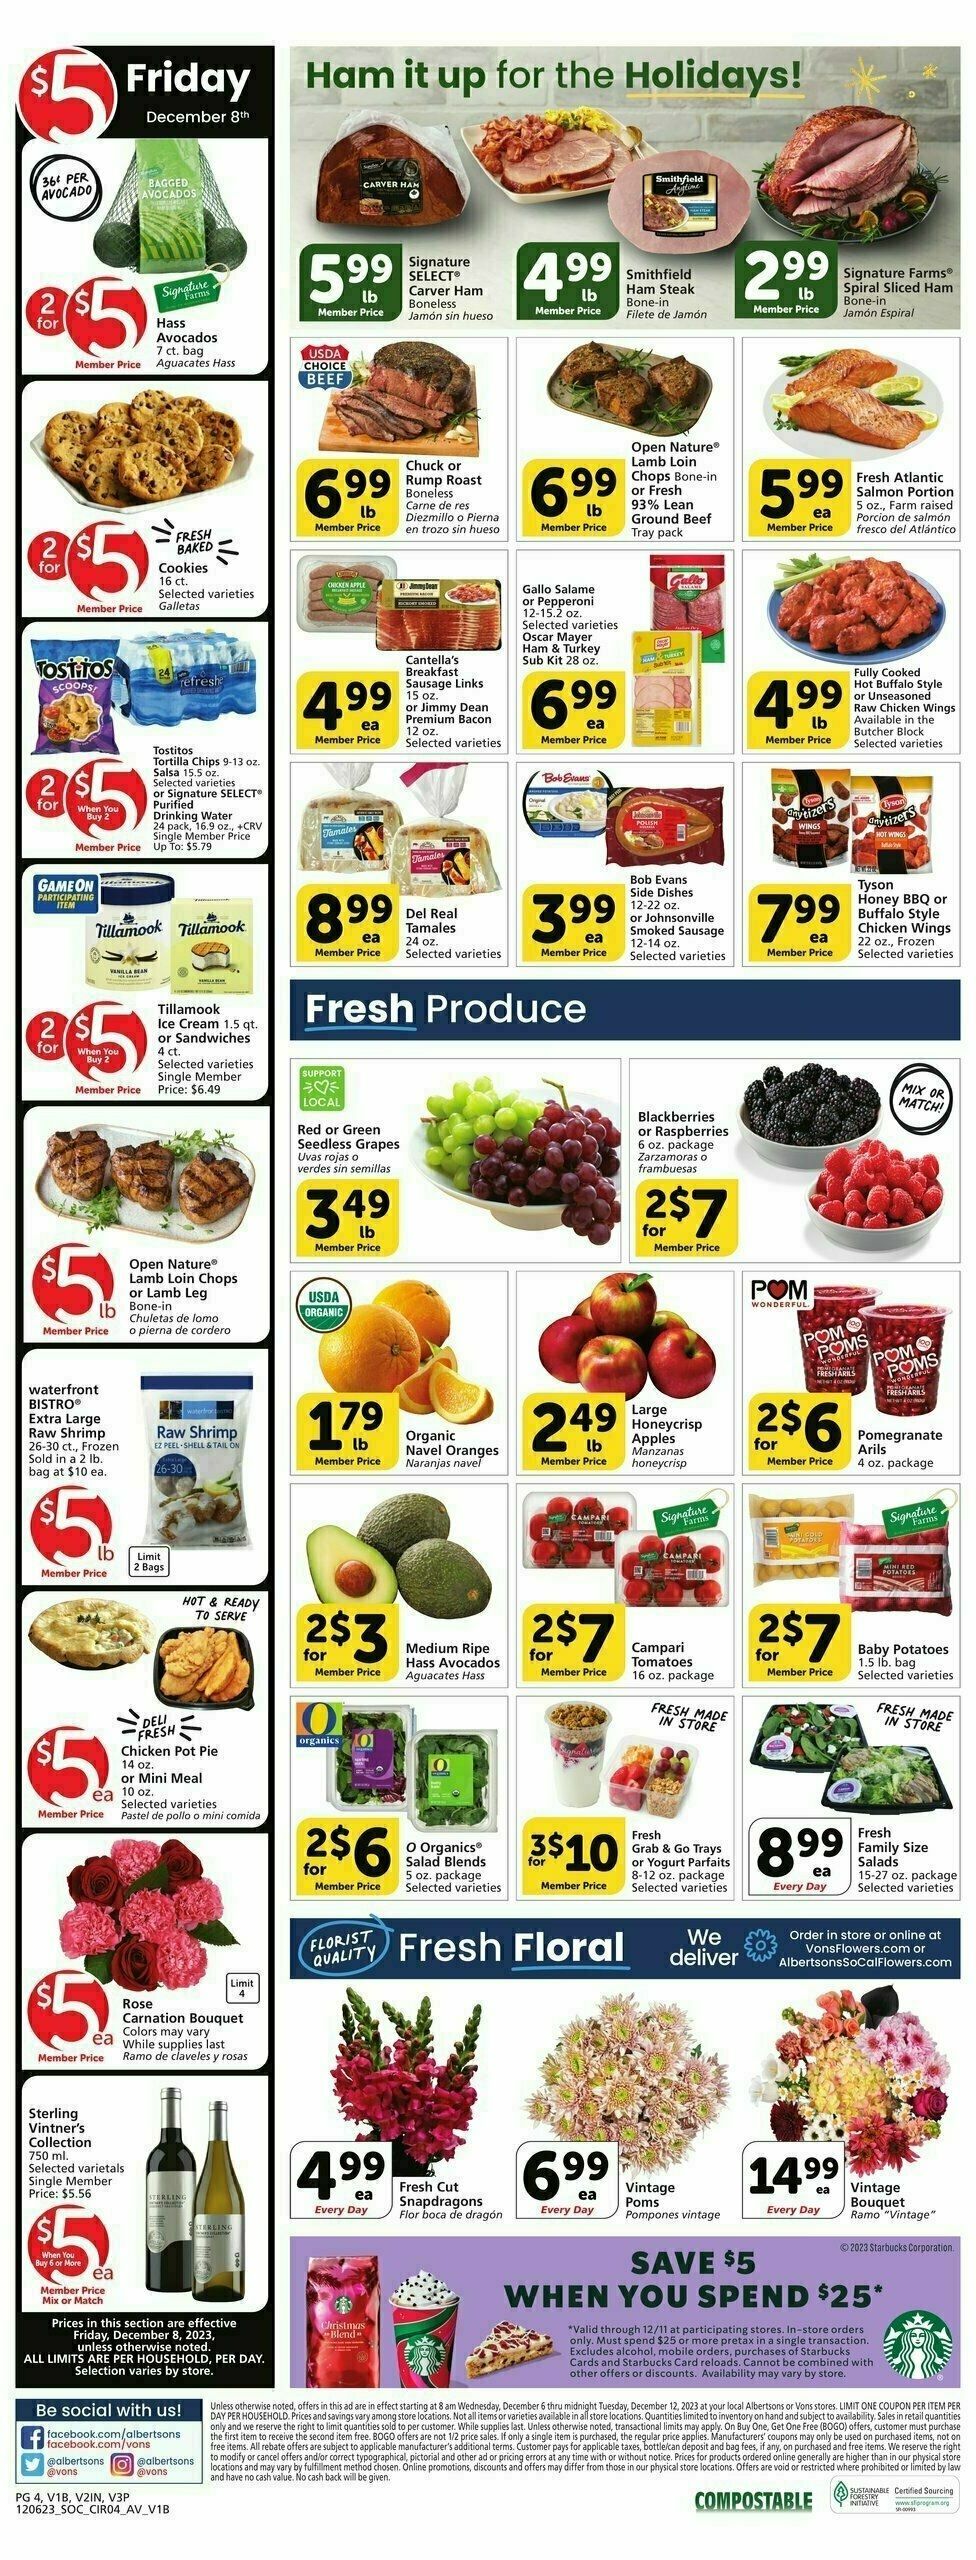 Vons Weekly Ad from December 6